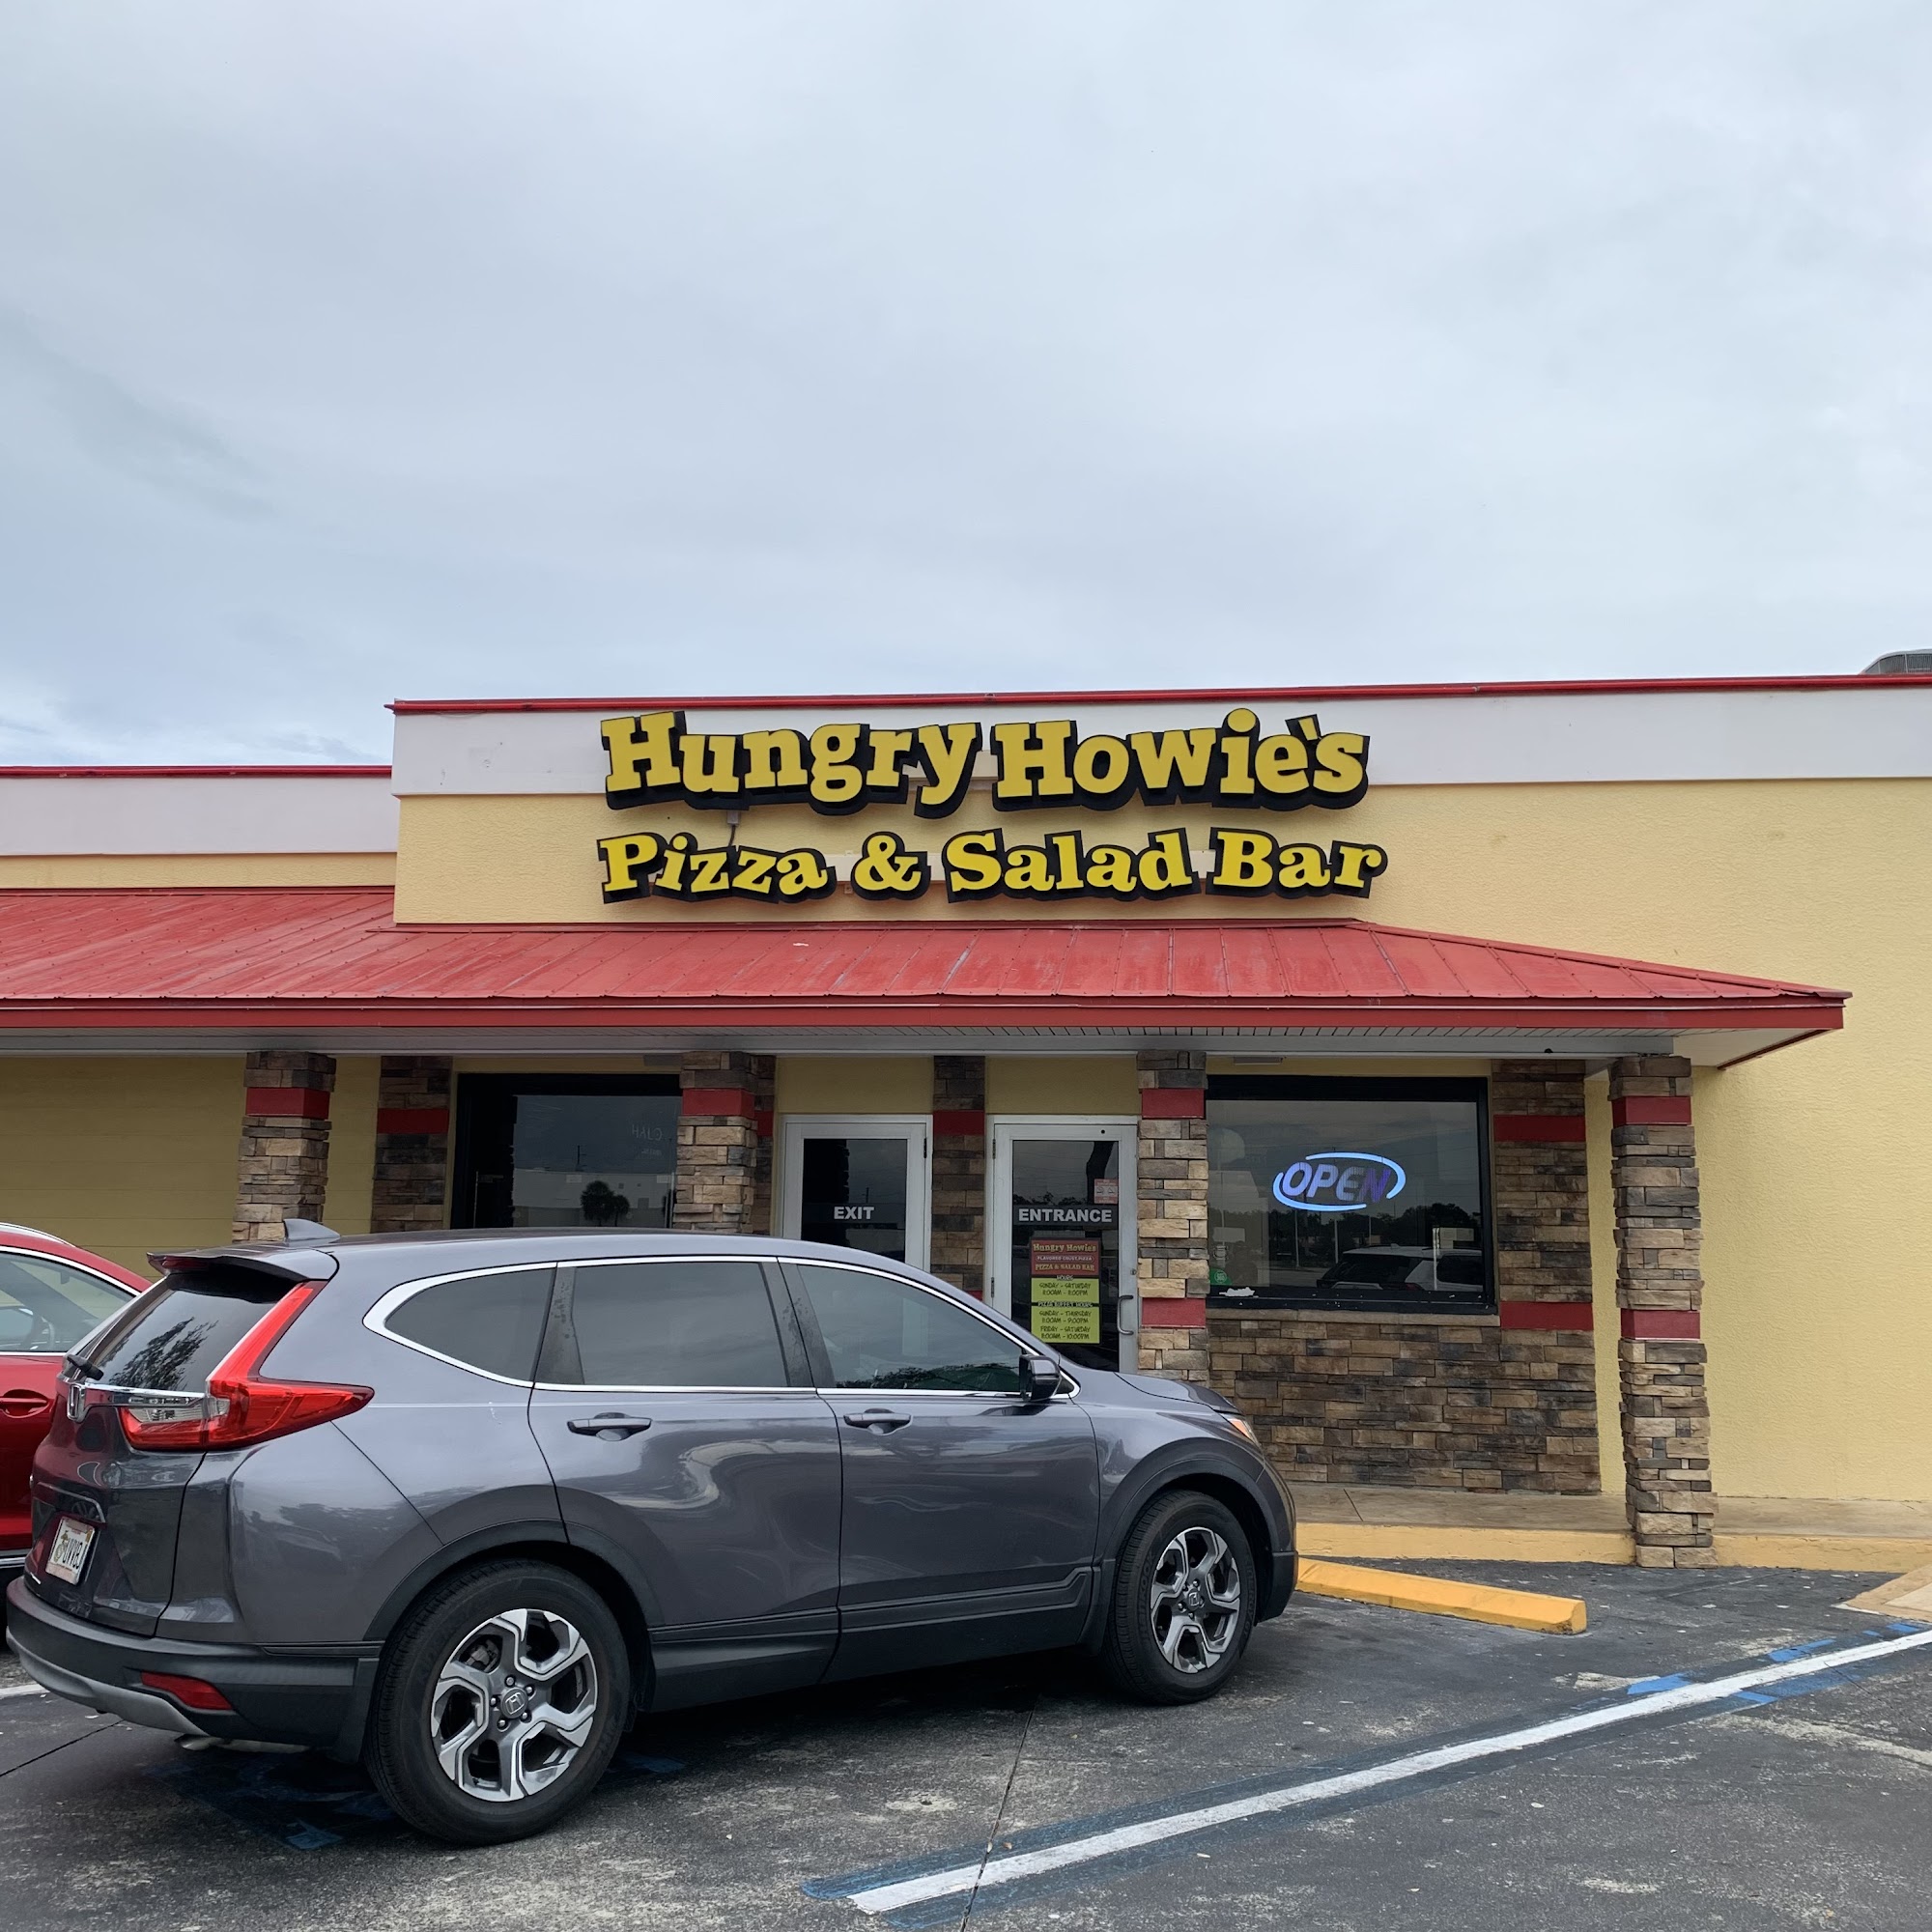 Hungry Howie's Pizza & Salad Bar